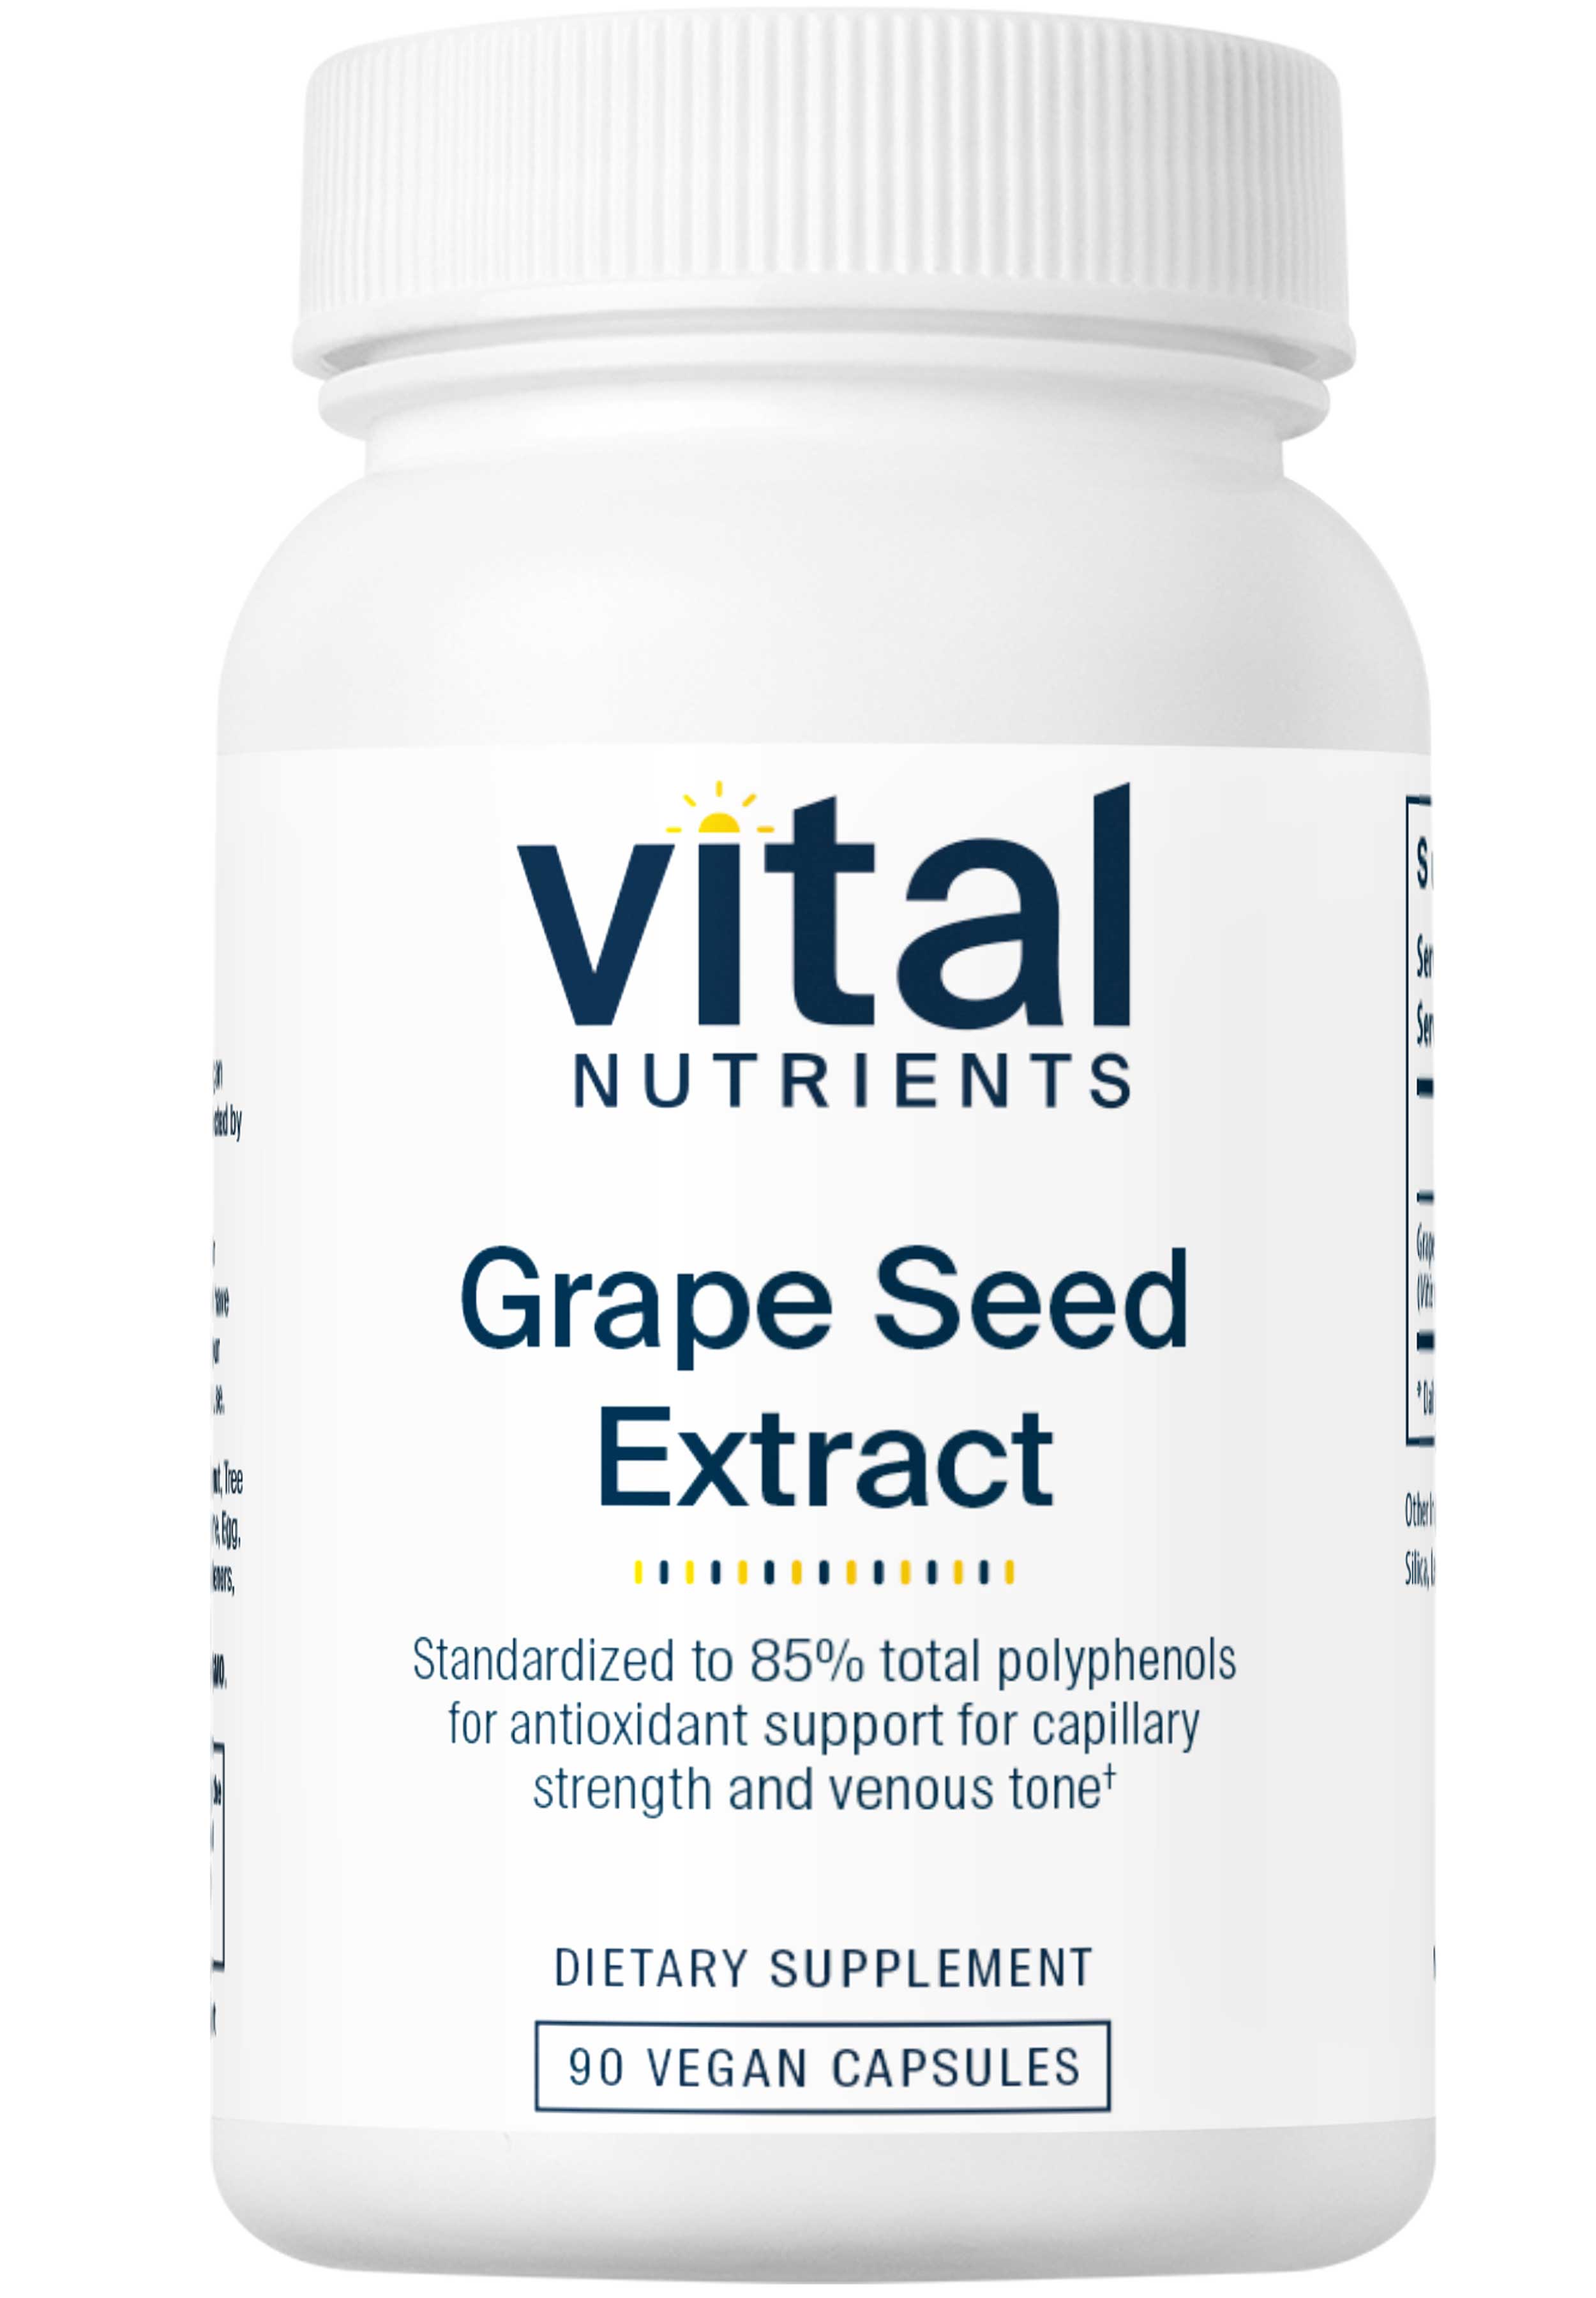 Vital Nutrients Grape Seed Extract 100mg